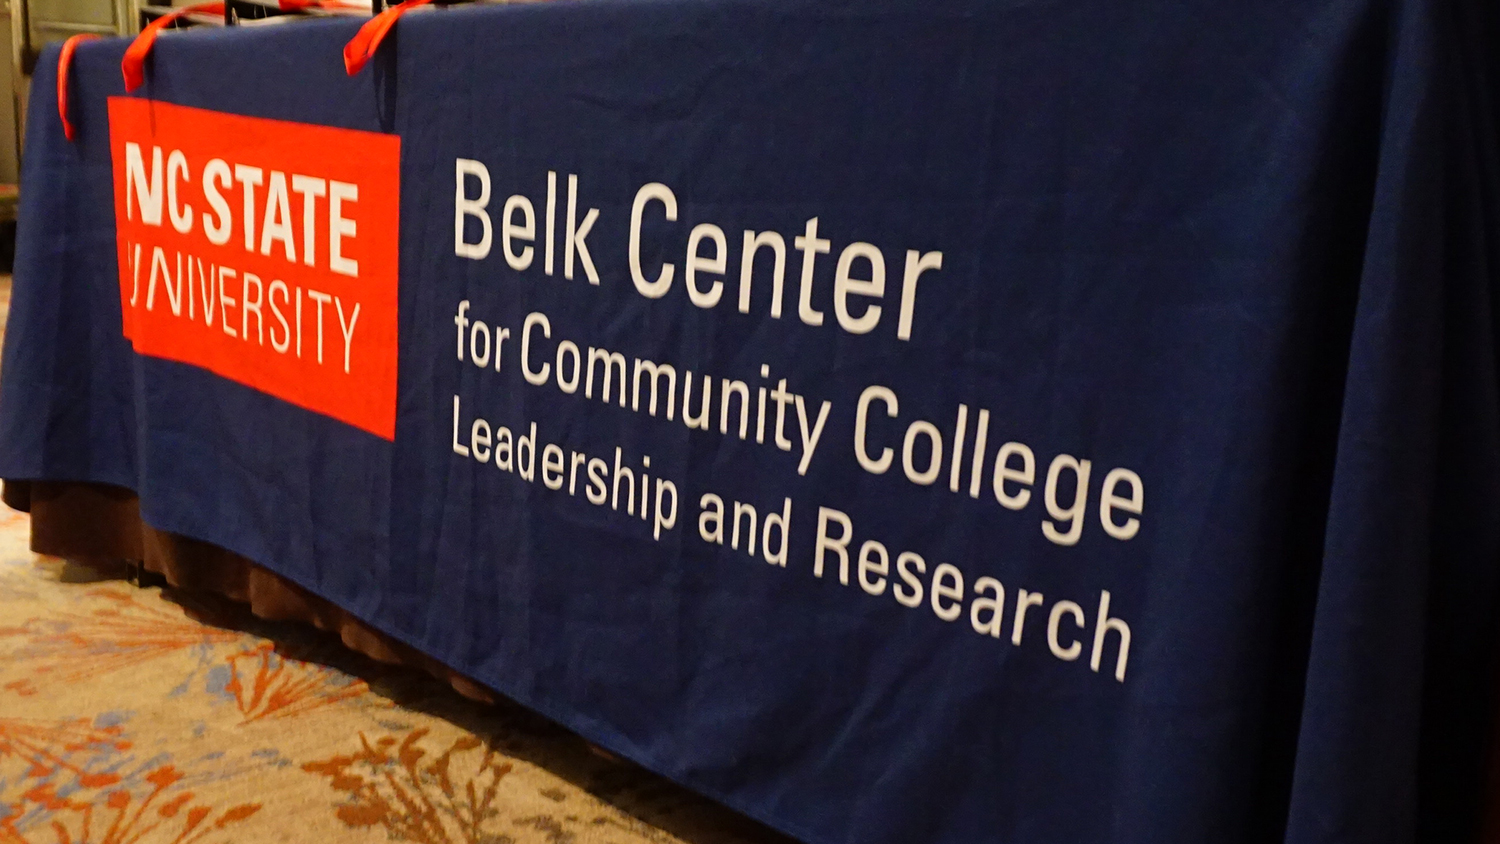 Belk Center for Community College Leadership and Research table cloth